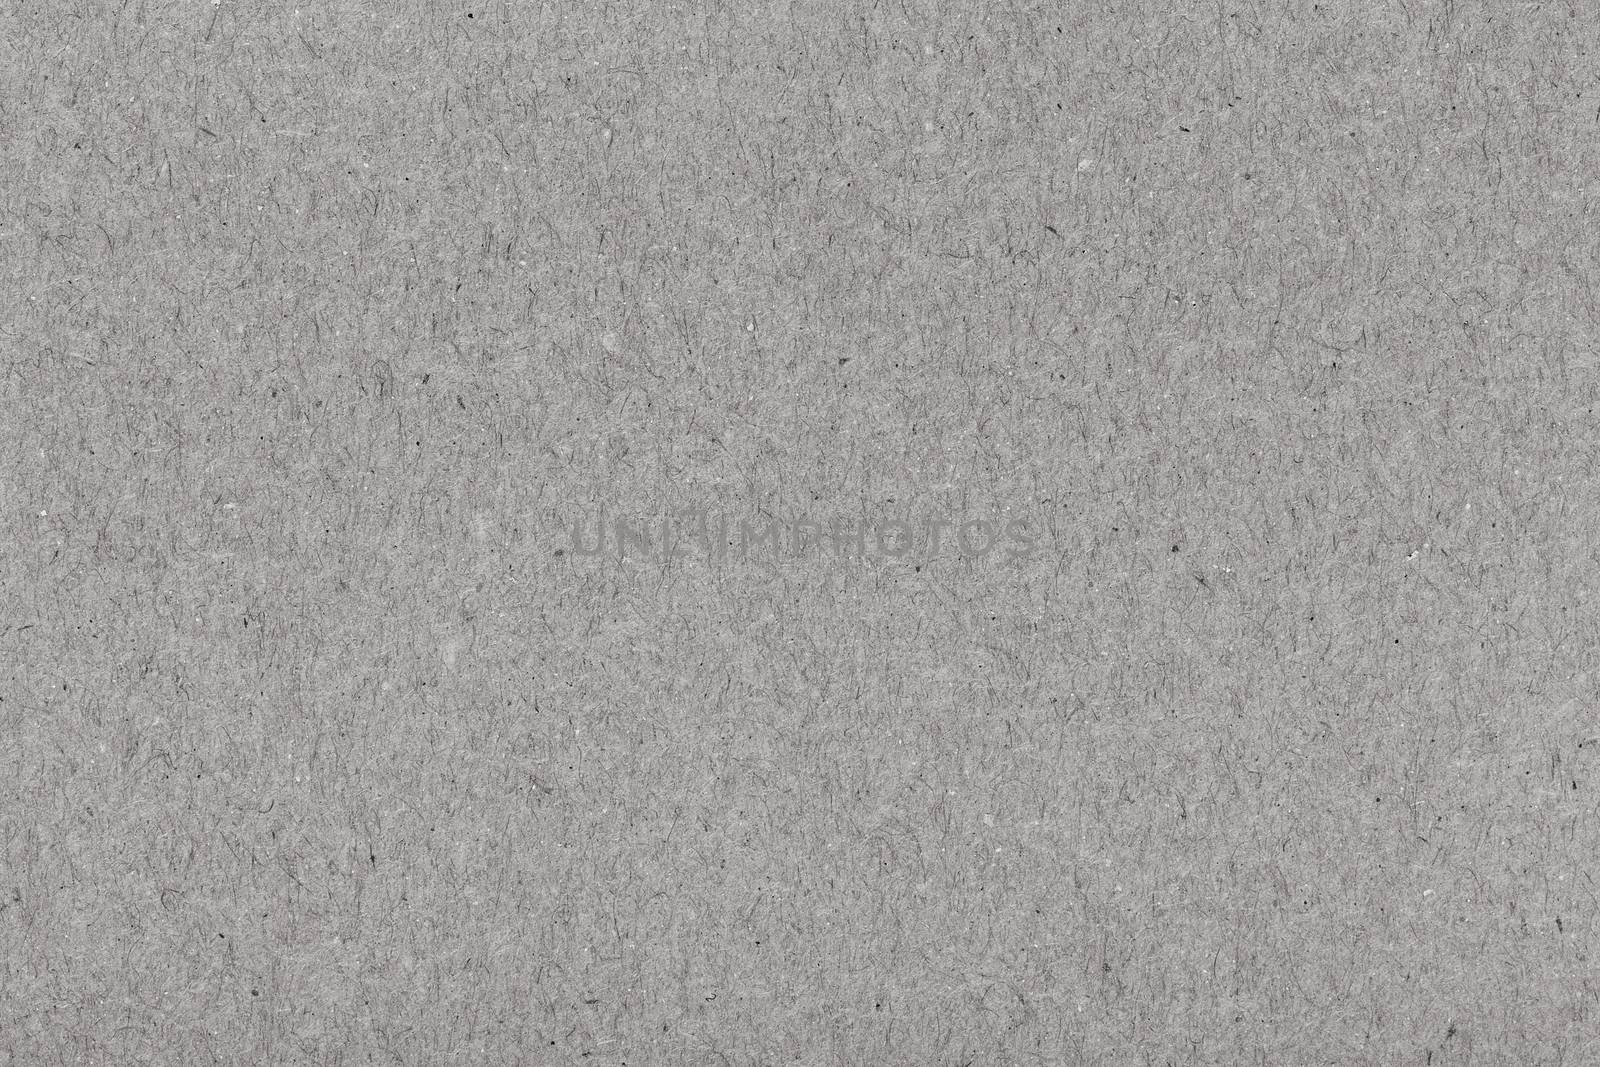 natural gray recycled paper texture background by ivo_13